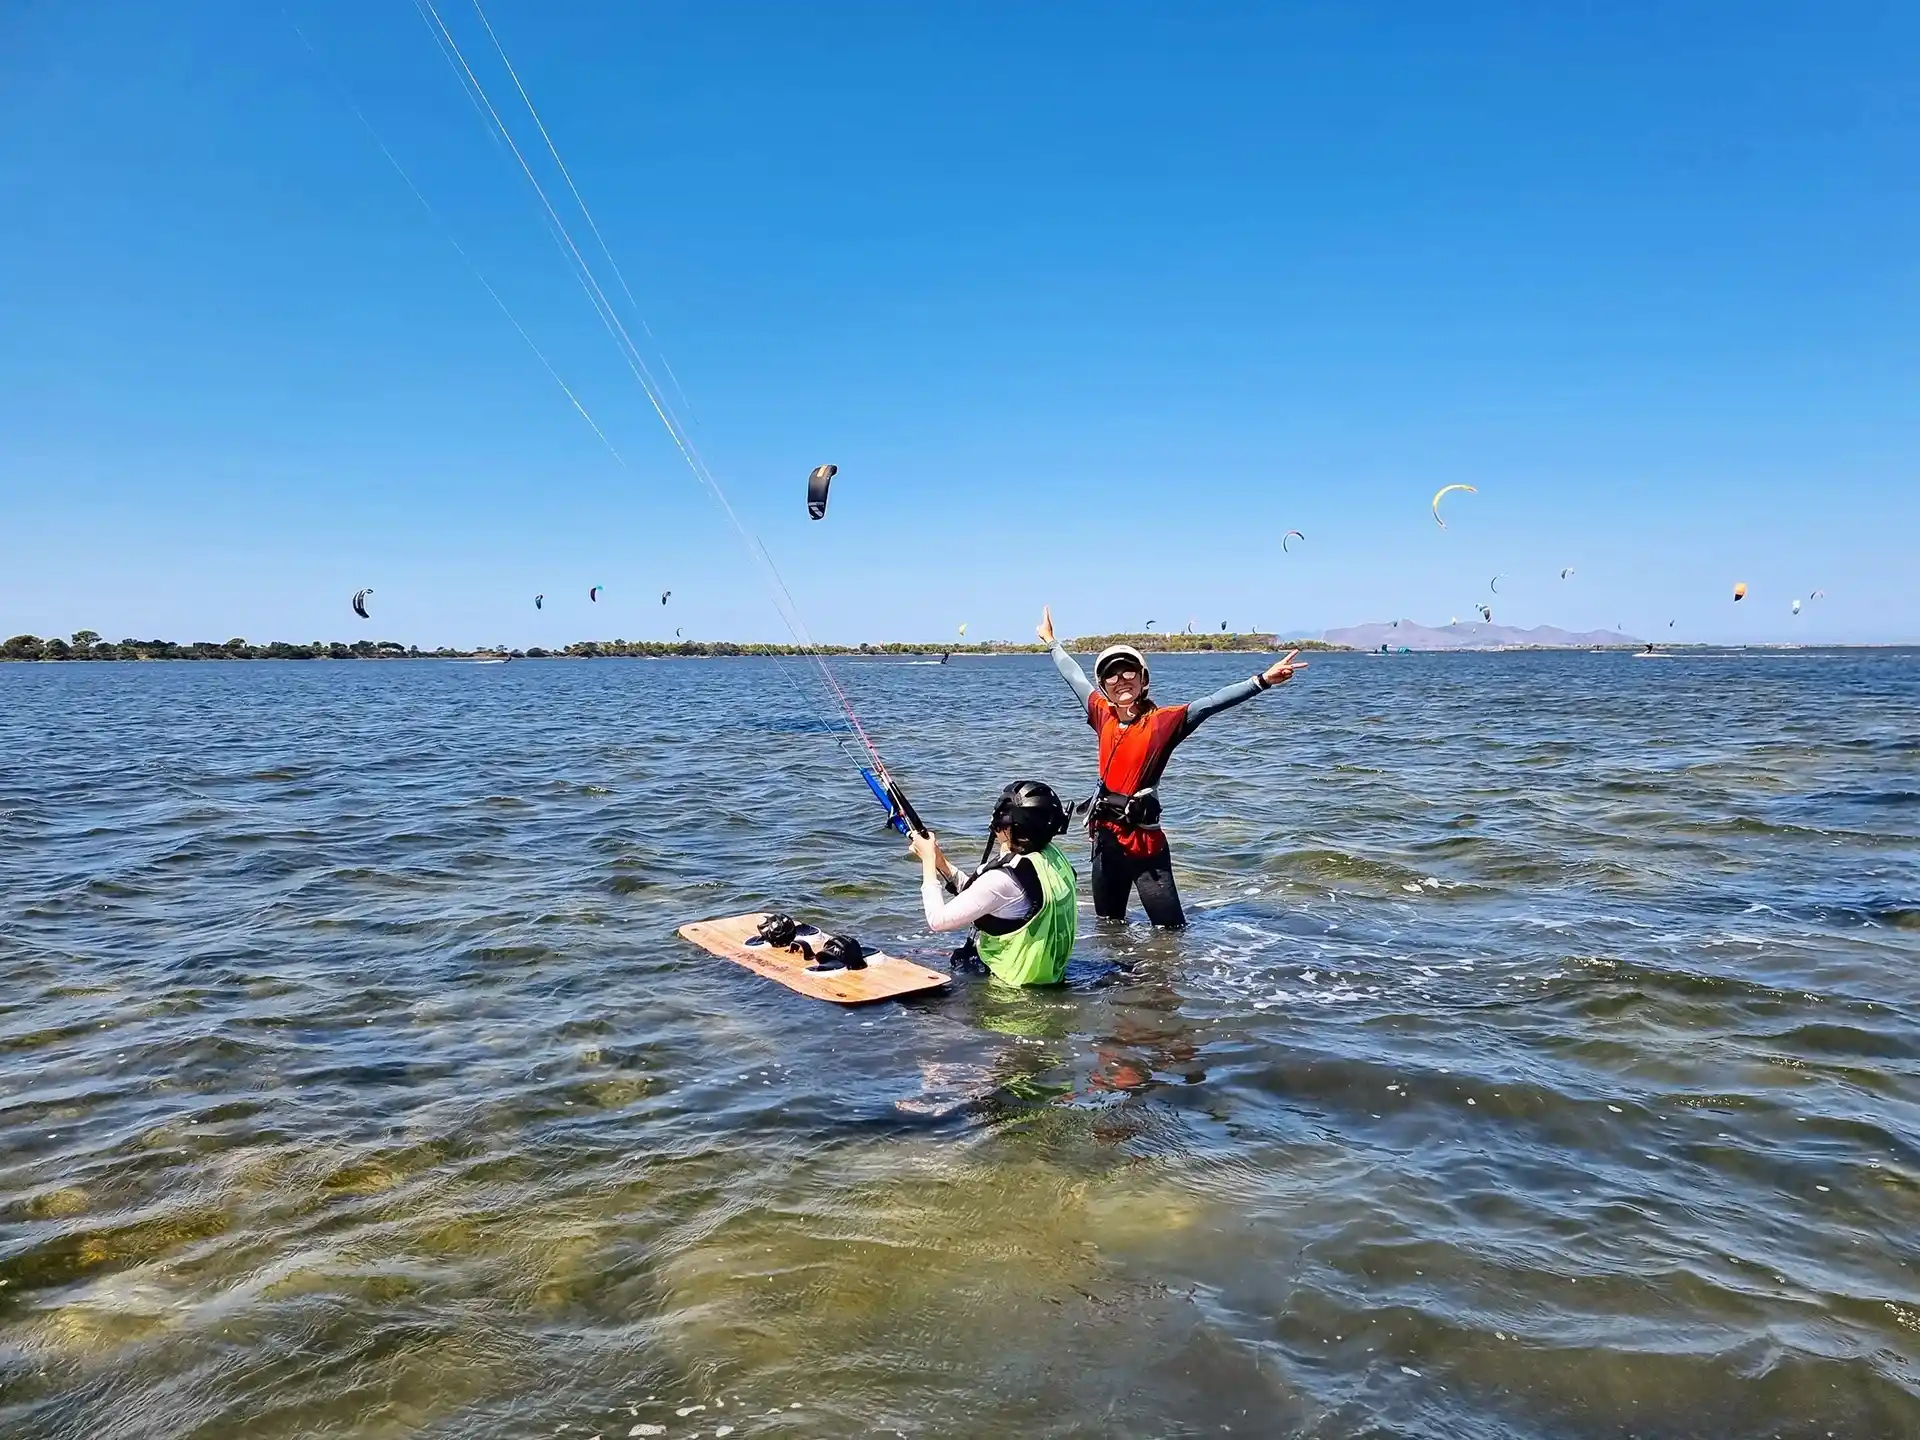 Huge lagoon, a lot of space for learning and improving your kitesurfing skills